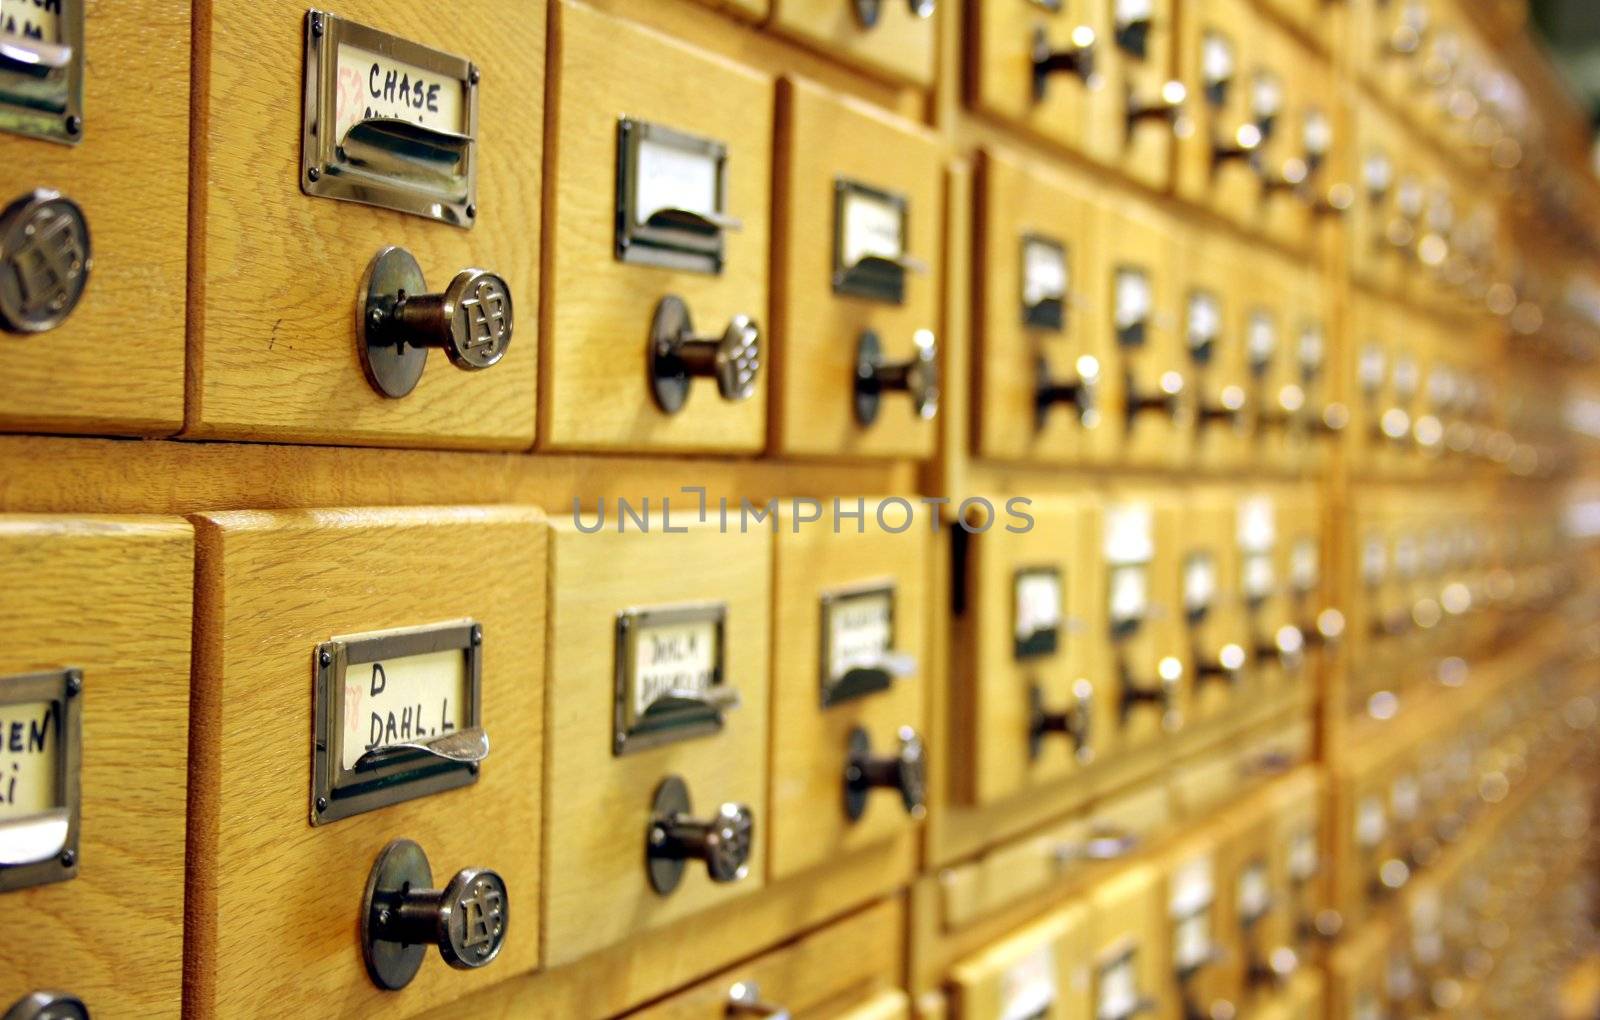 Closeup of card catalogue, showing several drawers